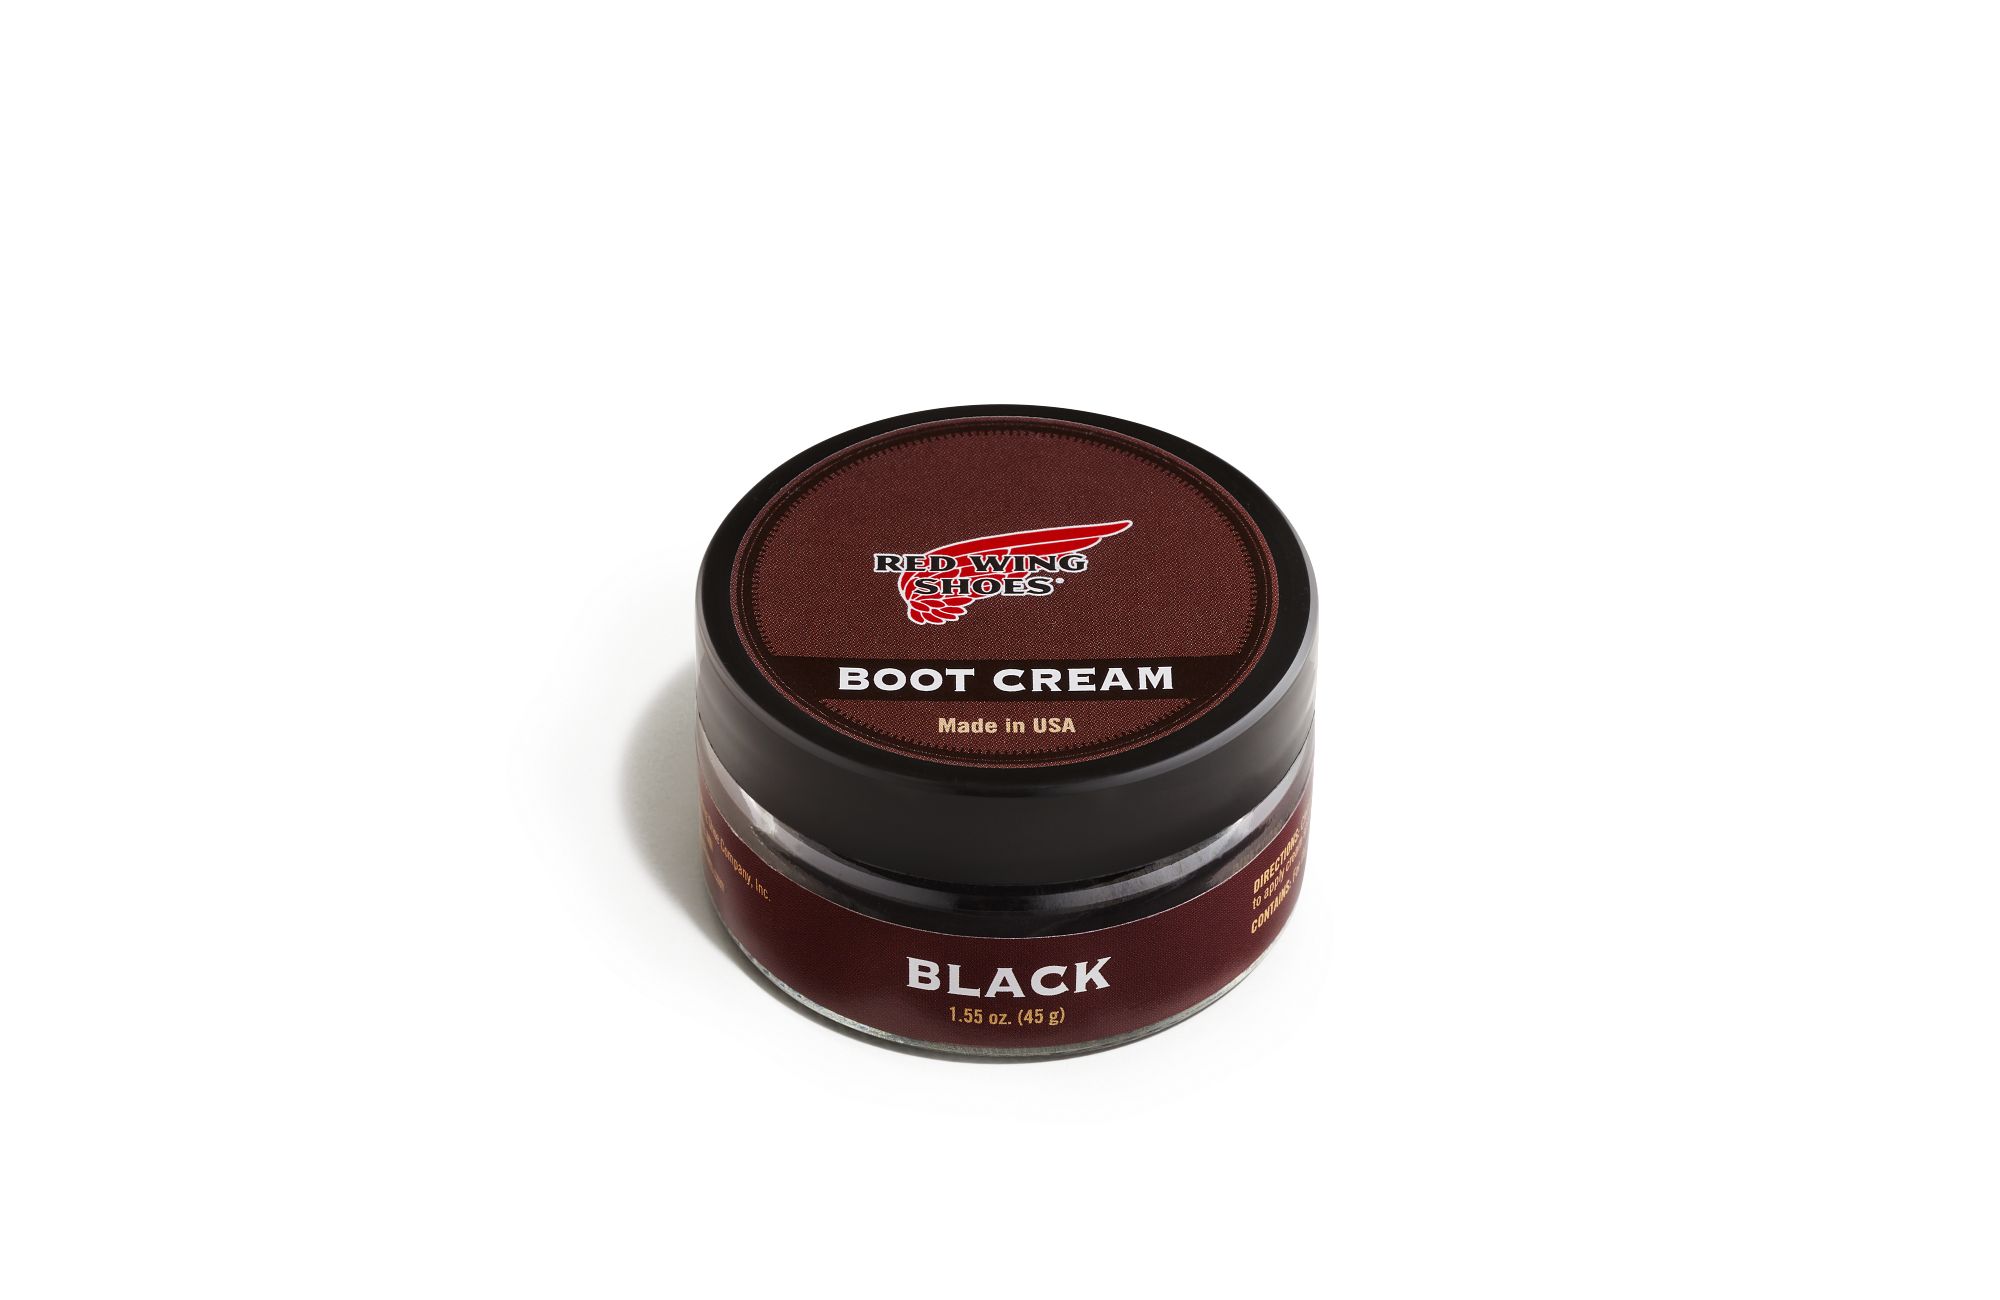 Review - Boot Black shoe care products 